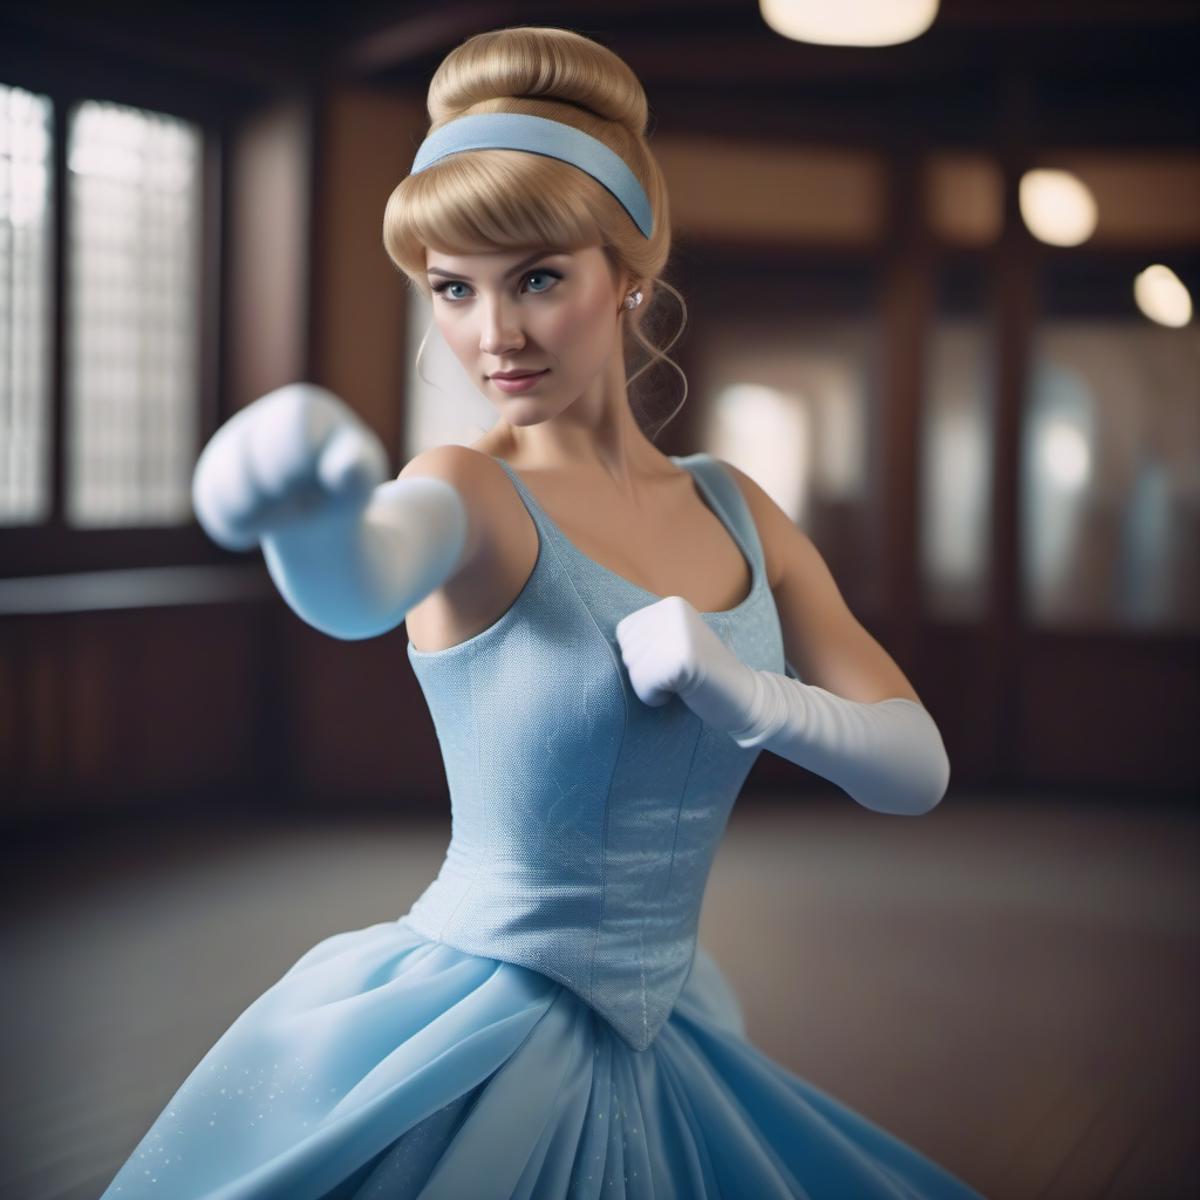 Cinderella - 1950 film and realistic - SDXL image by PhotobAIt